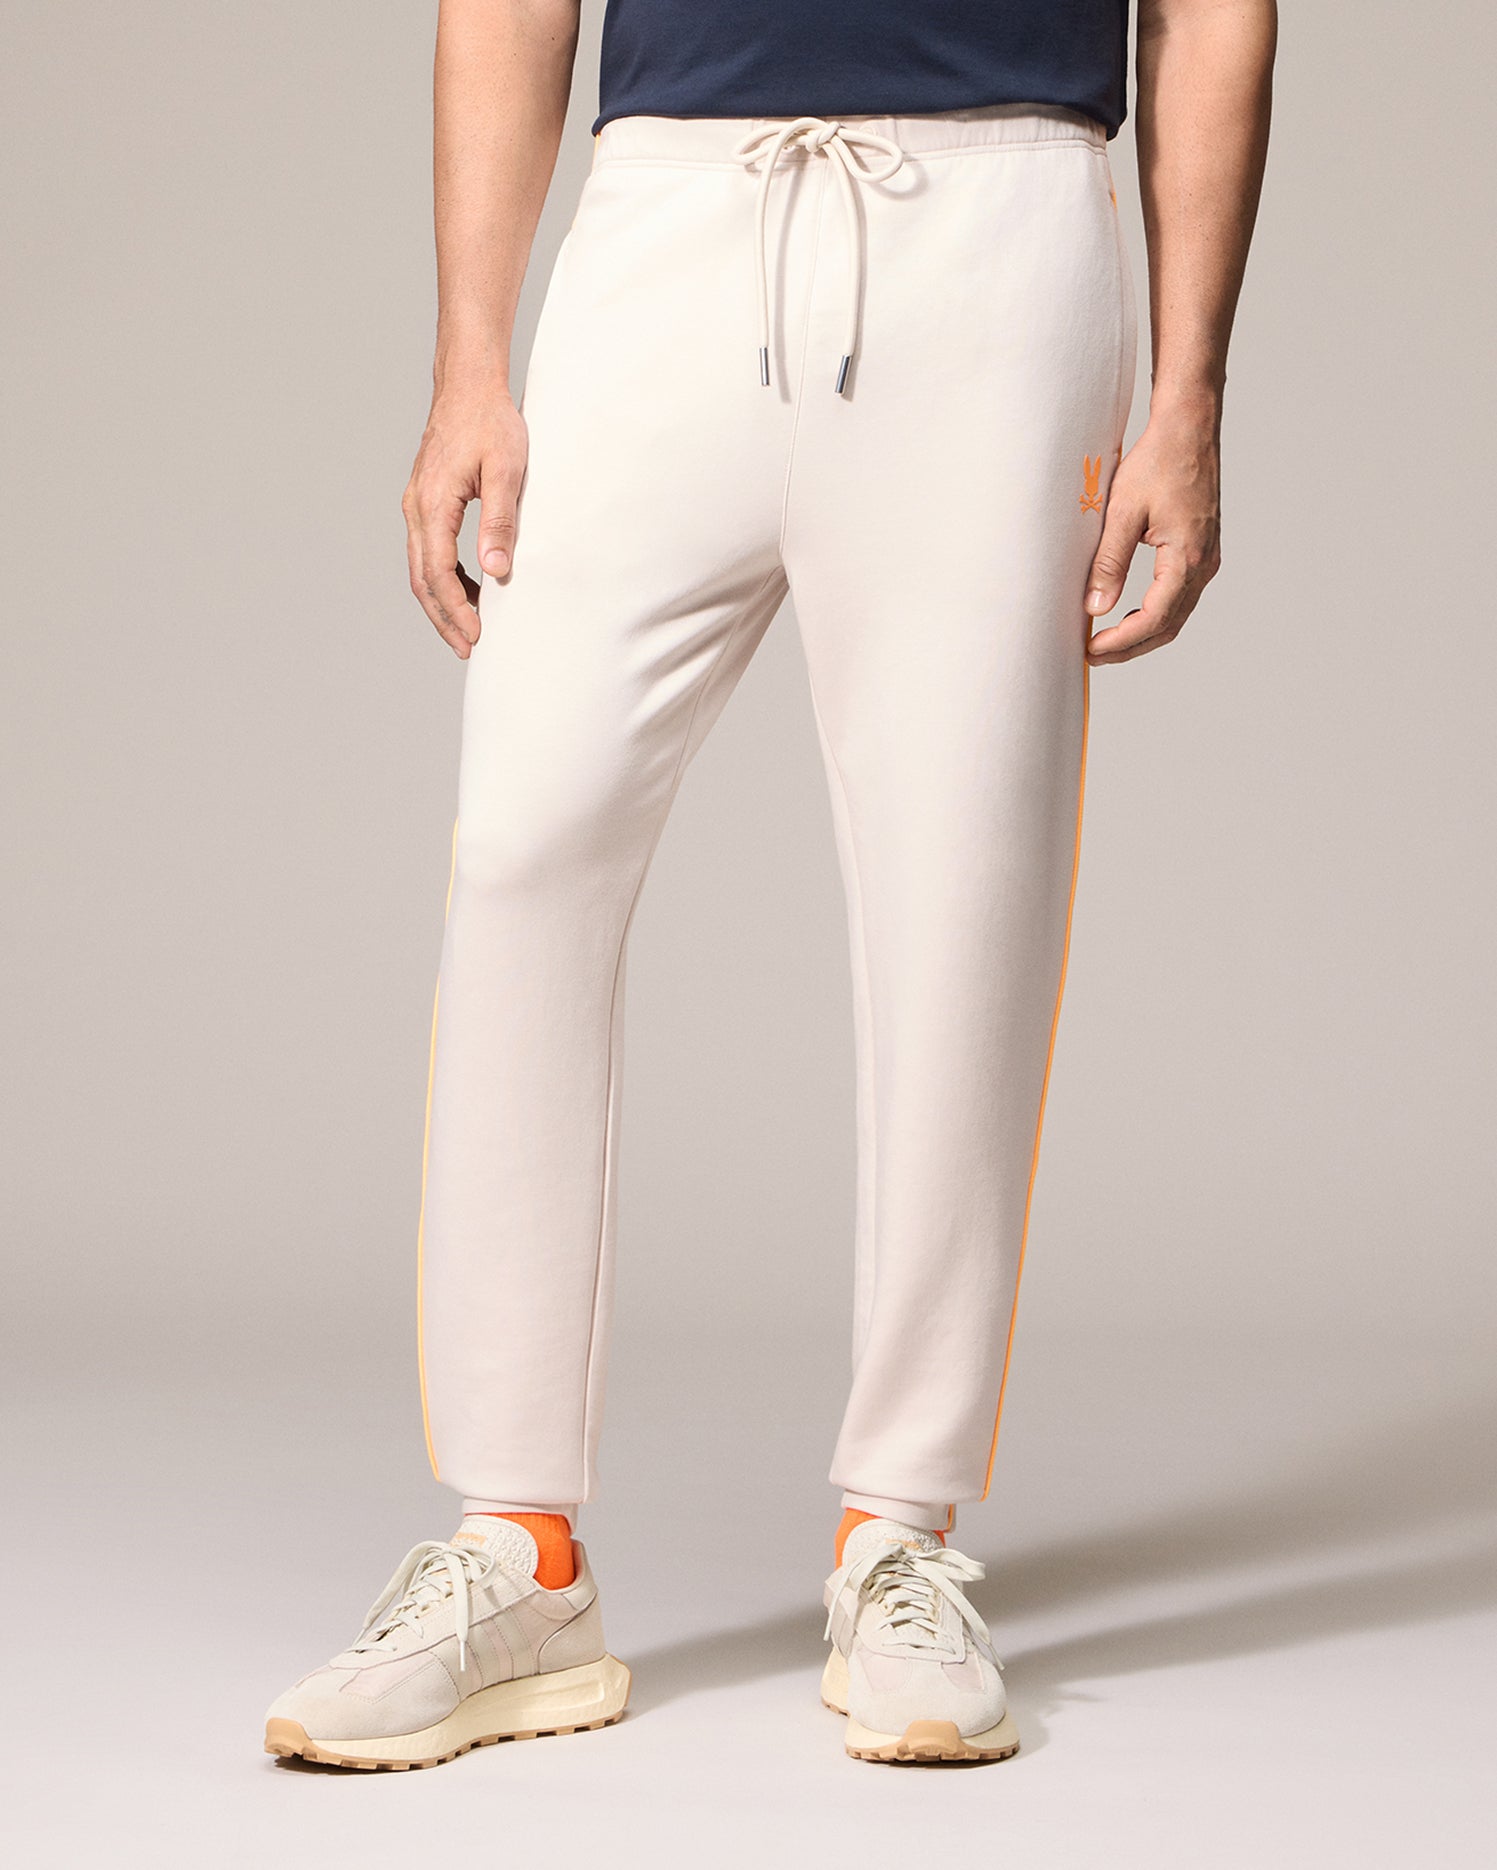 Buy Psycho Bunny Bennett Big & Tall Sweatpant at In Style –  InStyle-Tuscaloosa